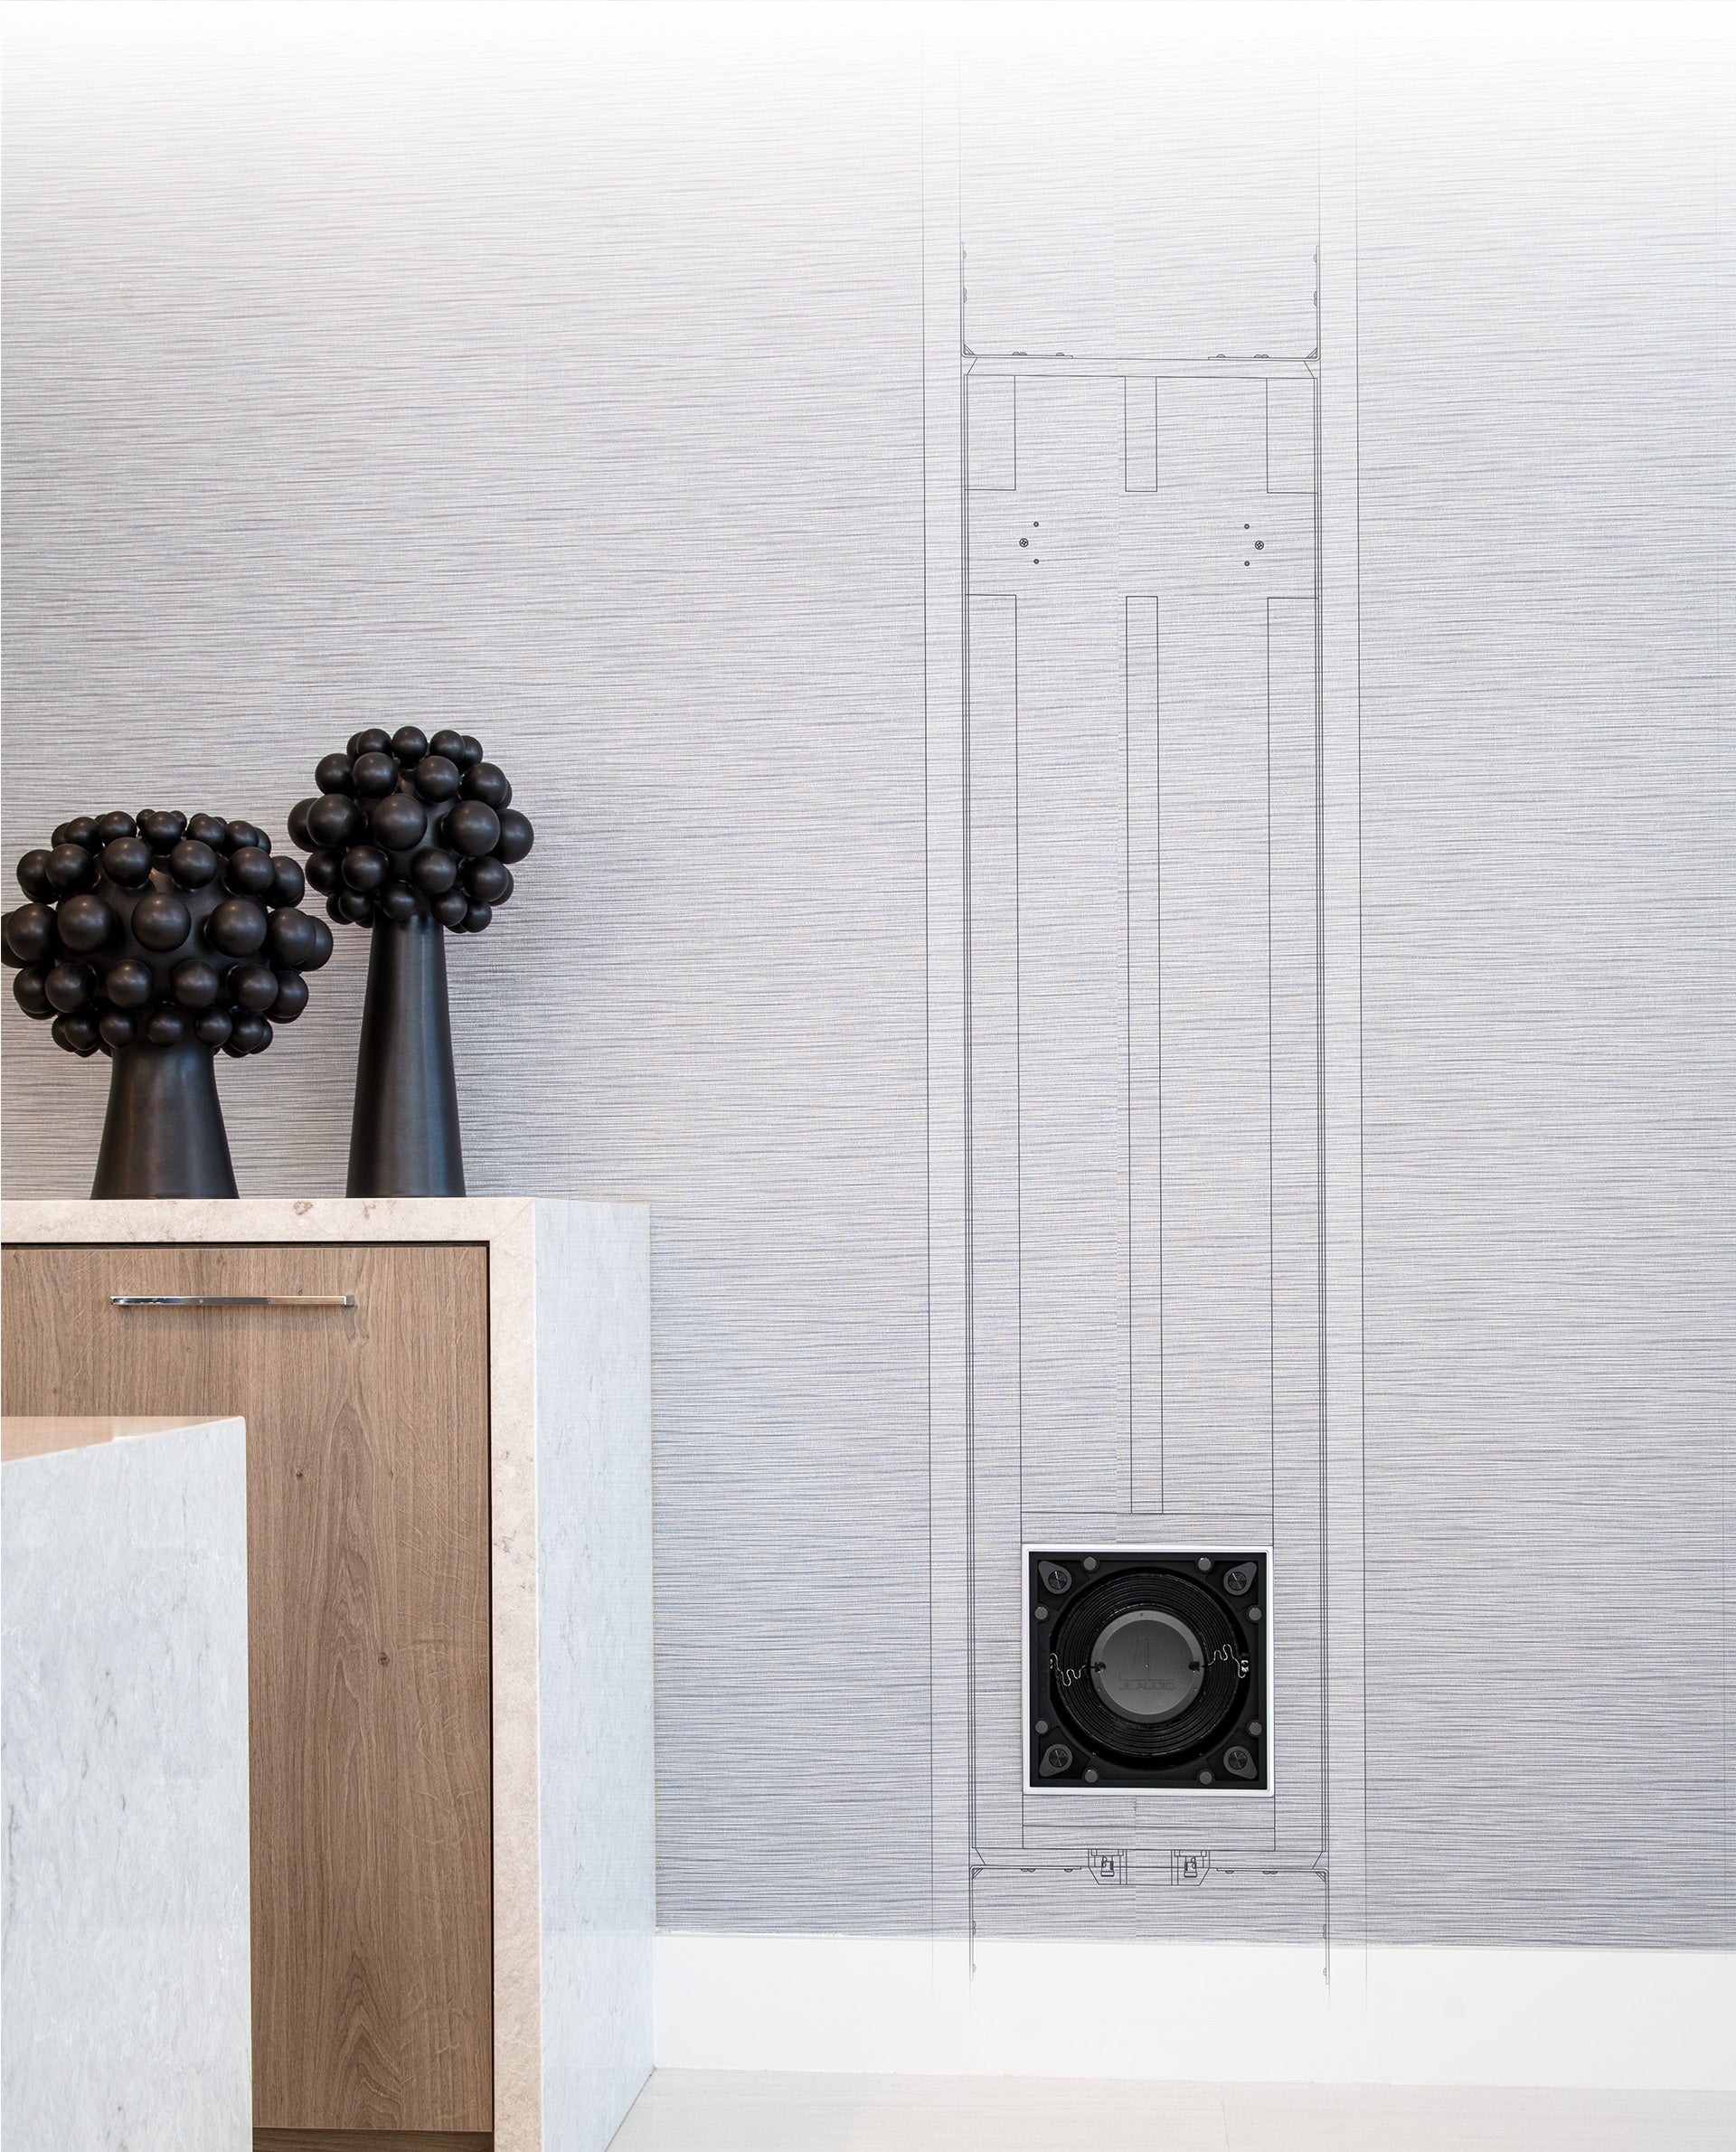 Fathom IWS-8 subwoofer in a home setting with schematic sketch of placement on wall.